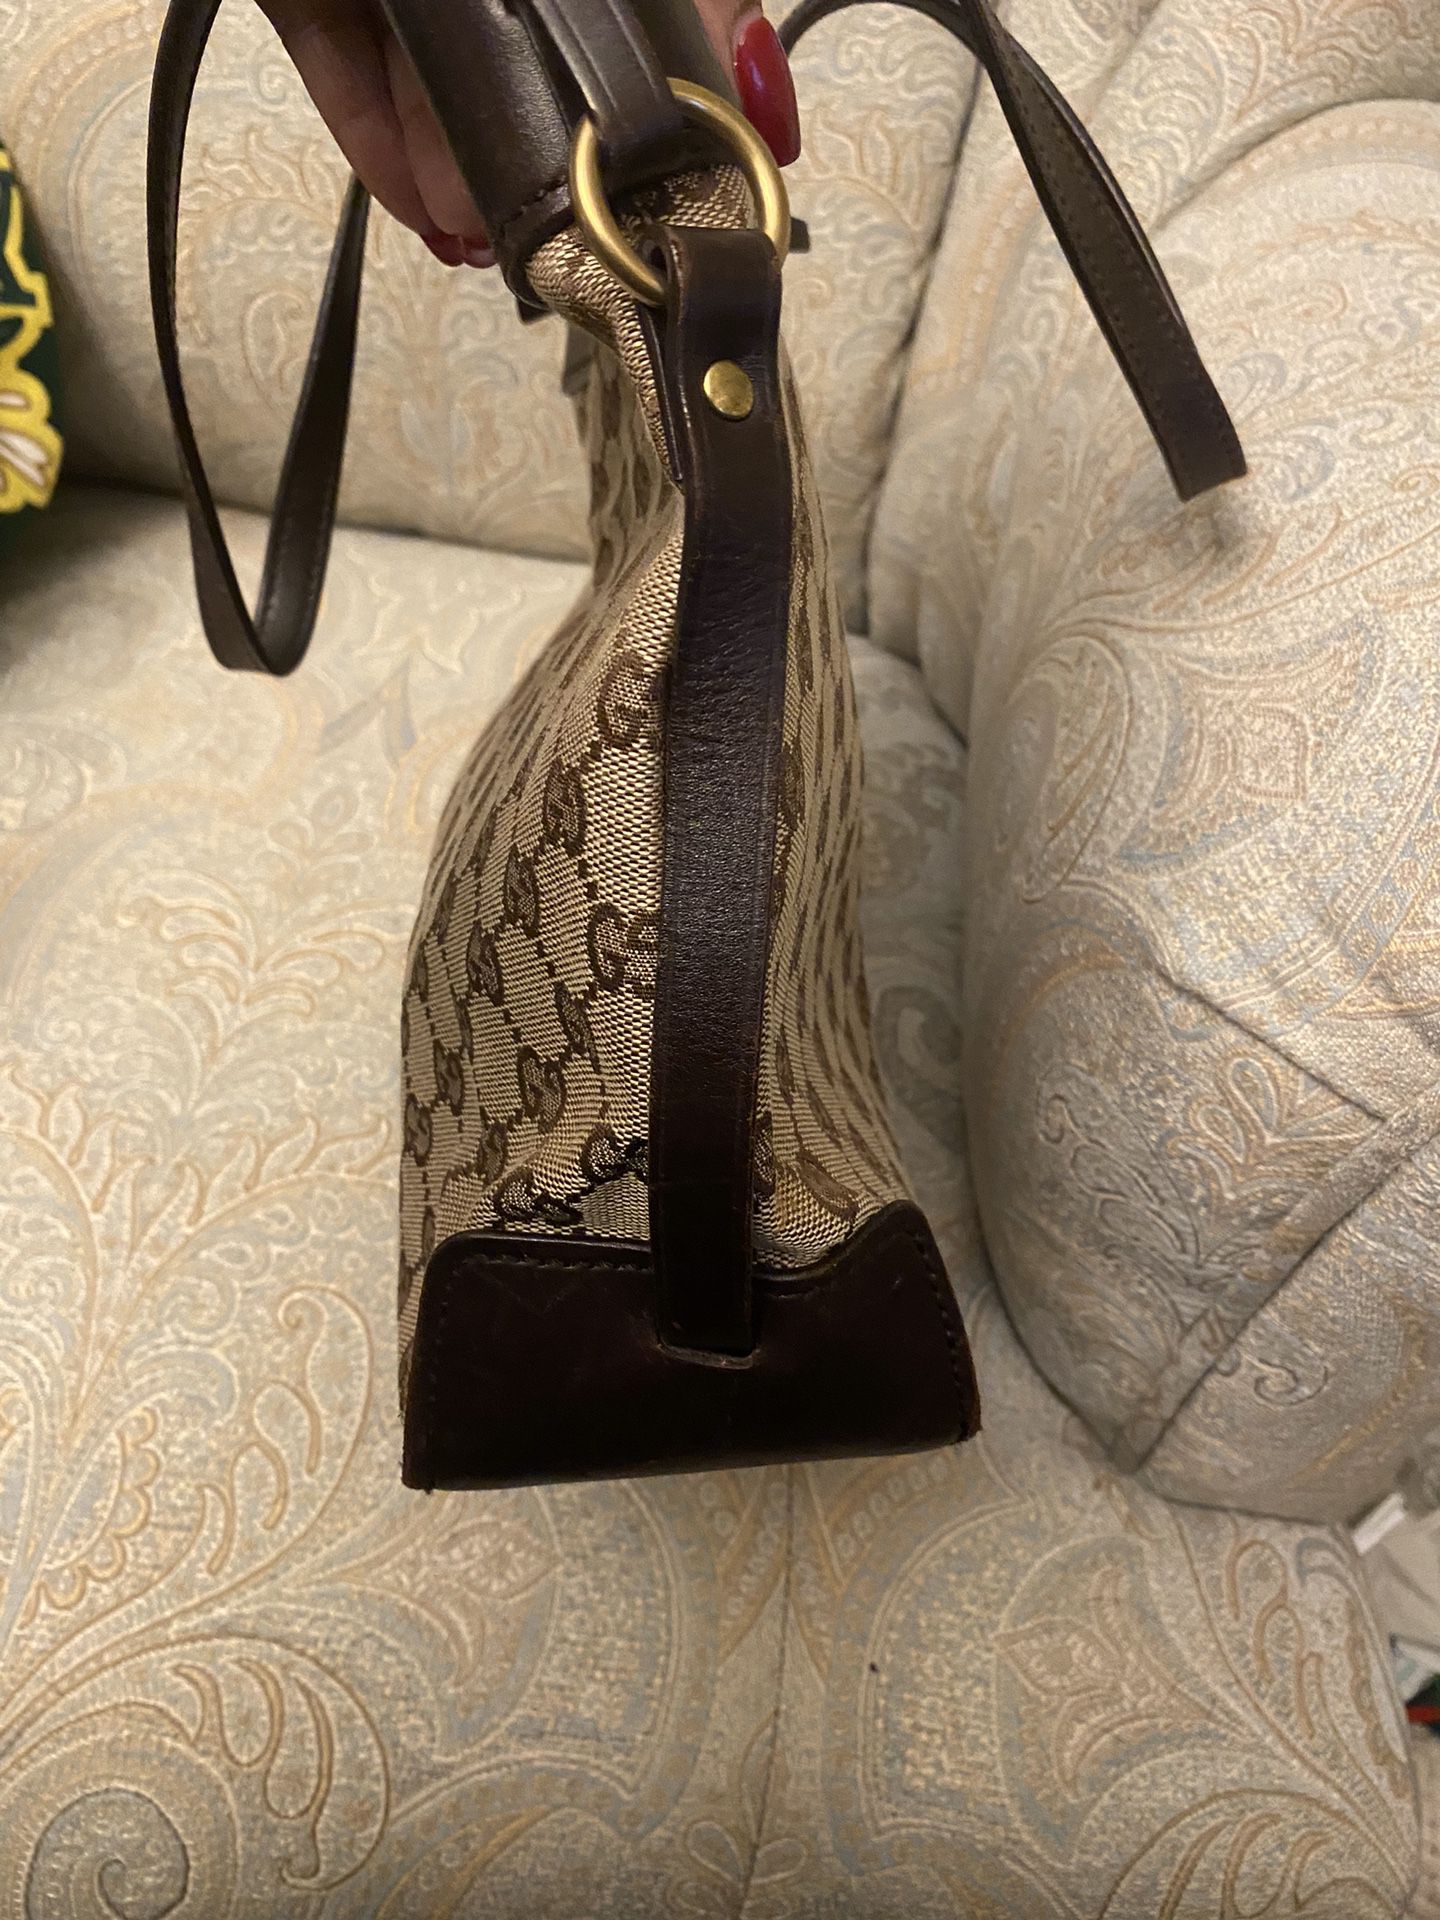 Never worn Gucci beige leather tote for Sale in Albany, NY - OfferUp